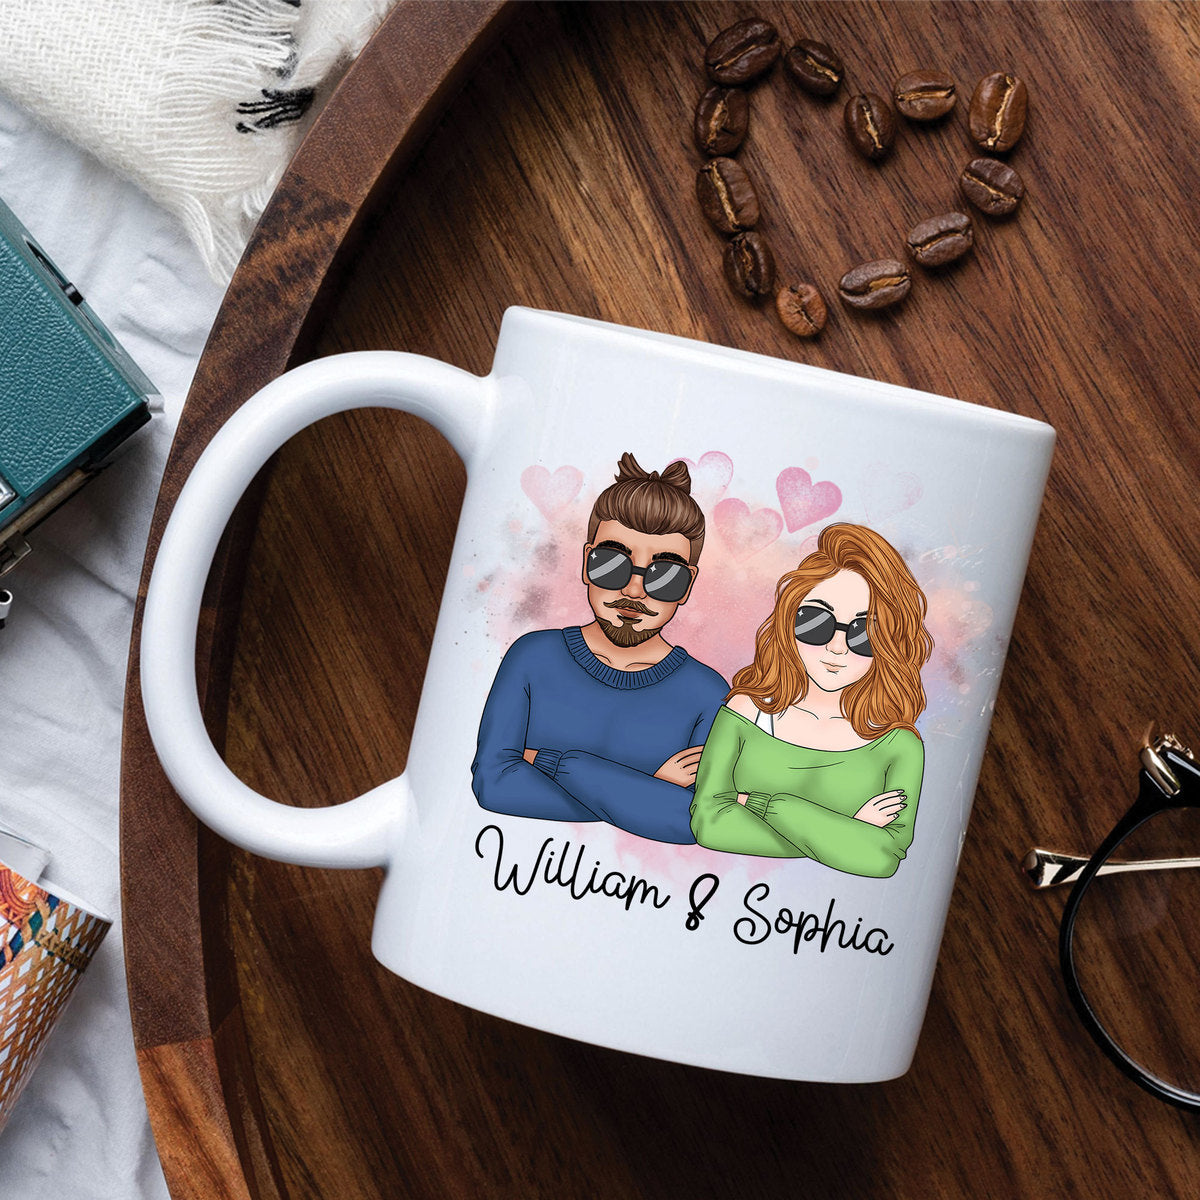 Express Your Love with Customized Couple Mugs - Perfect for Cherishing Moments Together